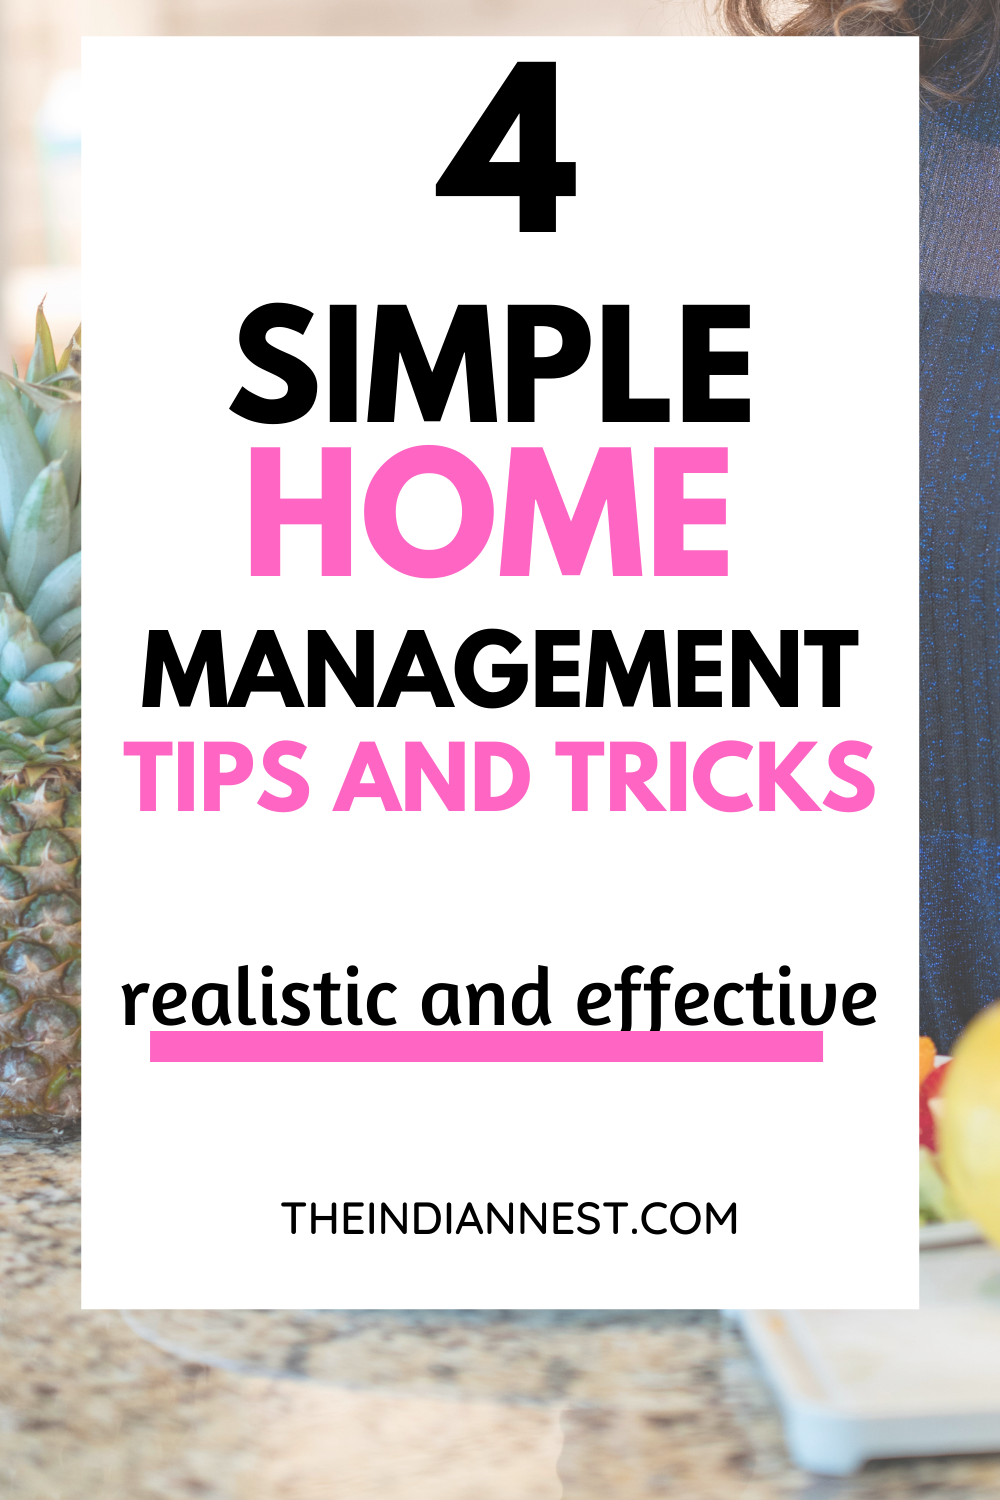 Best Home Management Tips That Are Easy And Effective. Managing a home is not an easy task. And if you don’t have any systems in place, you’re probably overwhelmed with all of it. 